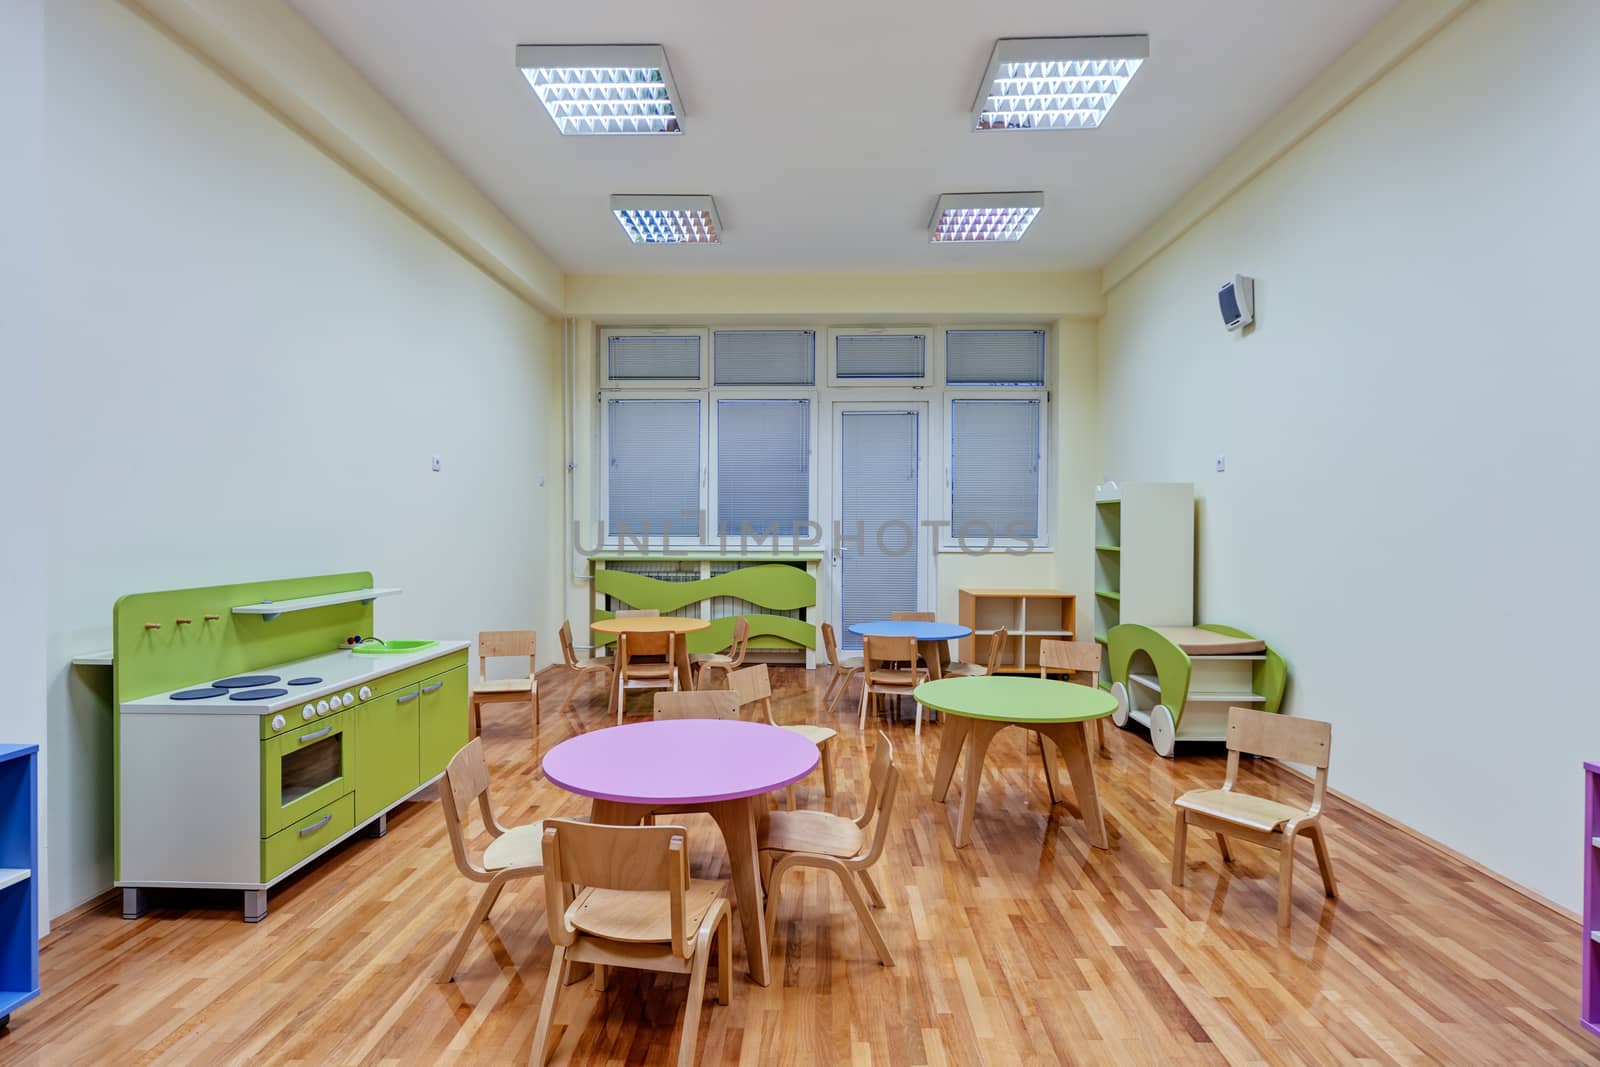 A preschool with little furniture for small children between the ages of three and five